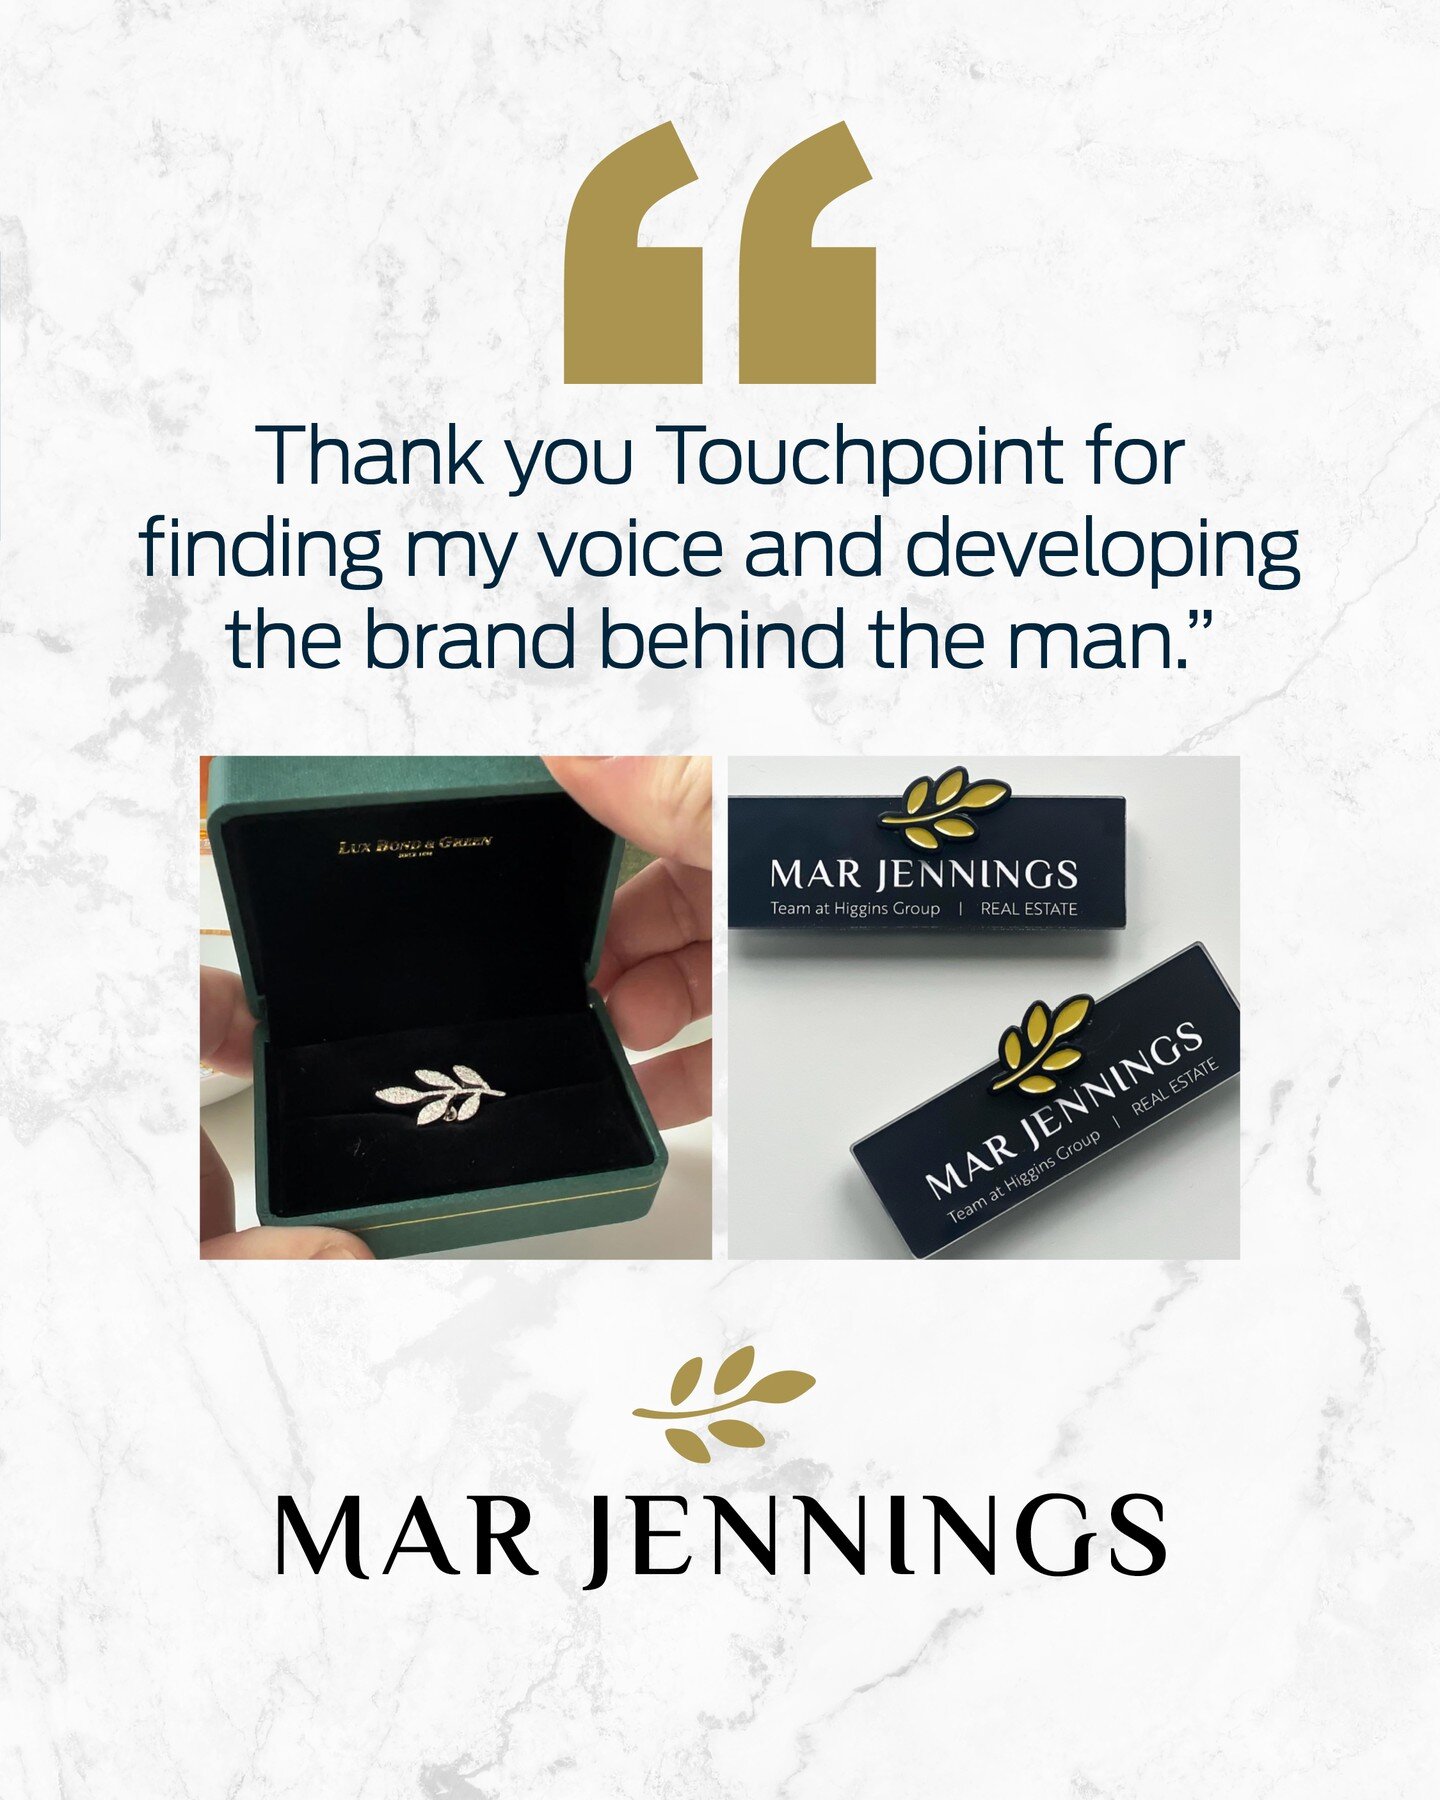 Touchpoint is proud to have recently partnered with @marjennings &mdash; realtor, lifestyle expert, author and TV personality &mdash; to rebrand and relaunch his eponymous website. If you&rsquo;re looking to rebrand, Touchpoint is here to get into th